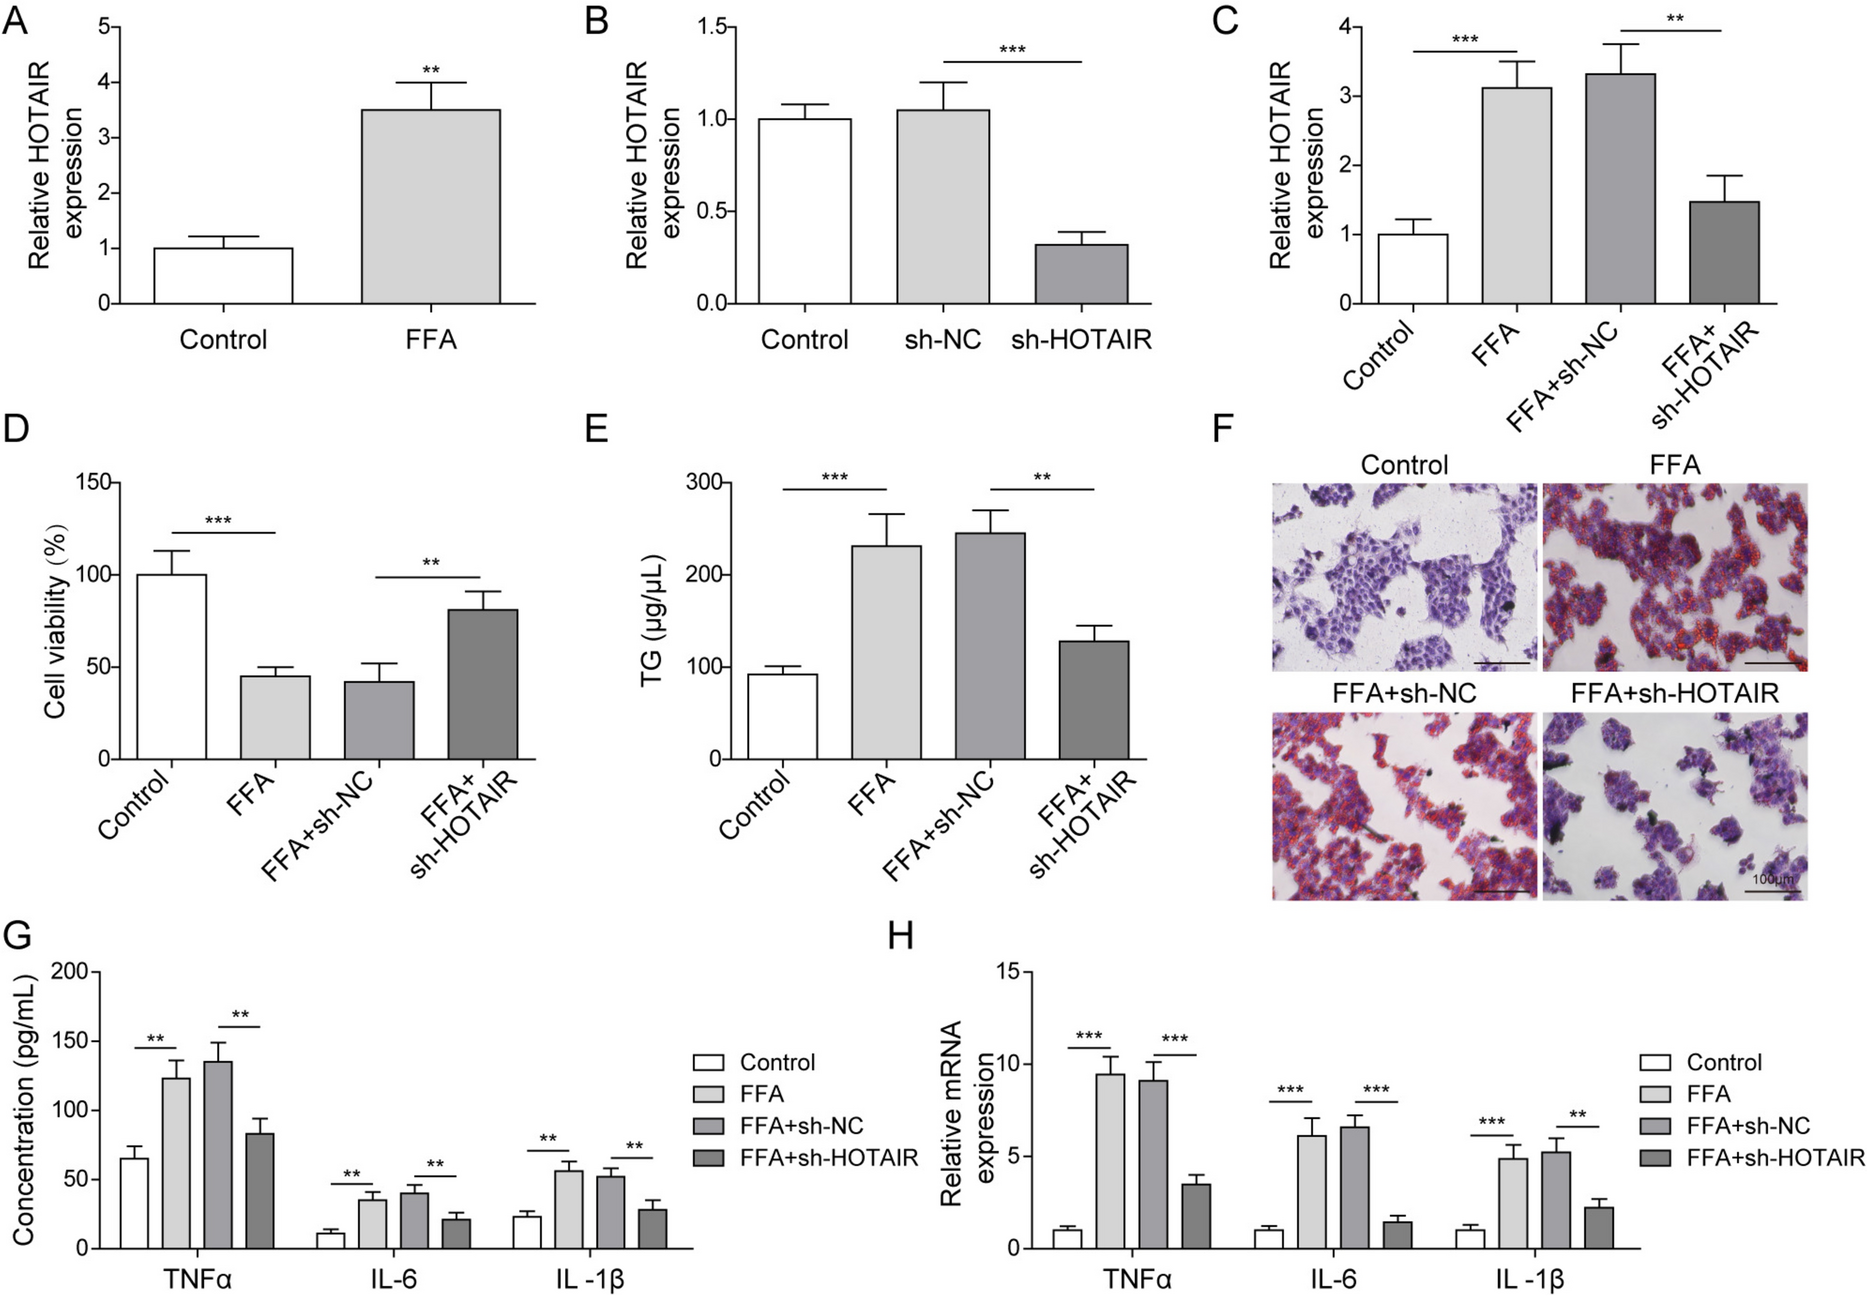 LncRNA HOTAIR accelerates free fatty acid-induced inflammatory response in HepG2 cells by recruiting SRSF1 to stabilize MLXIPL mRNA